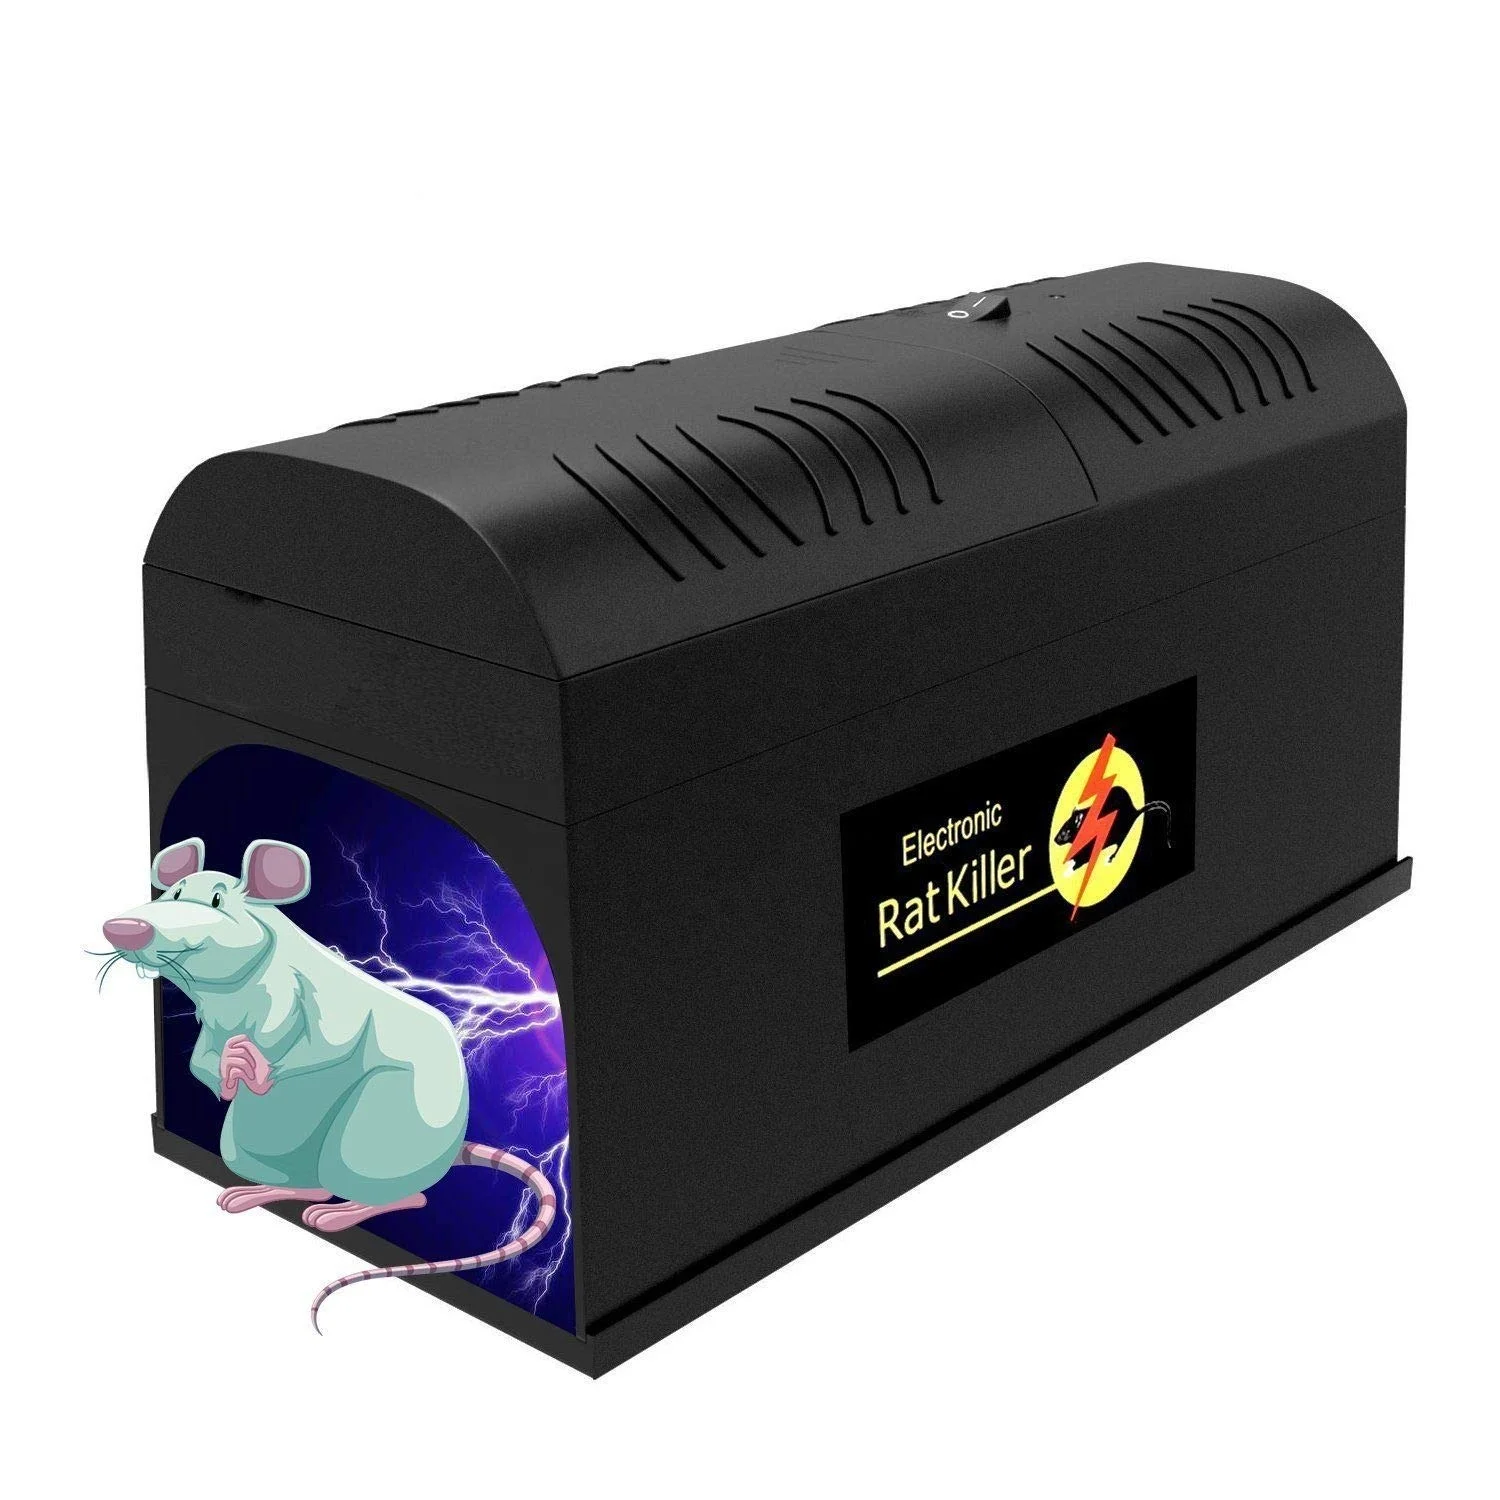 
EPA Indoor Outdoor High Voltage Electronic Rodent Killer Humane Electric Shock Mouse Trap for Hunting Mice Rat Mole Vole Marten  (60511280950)